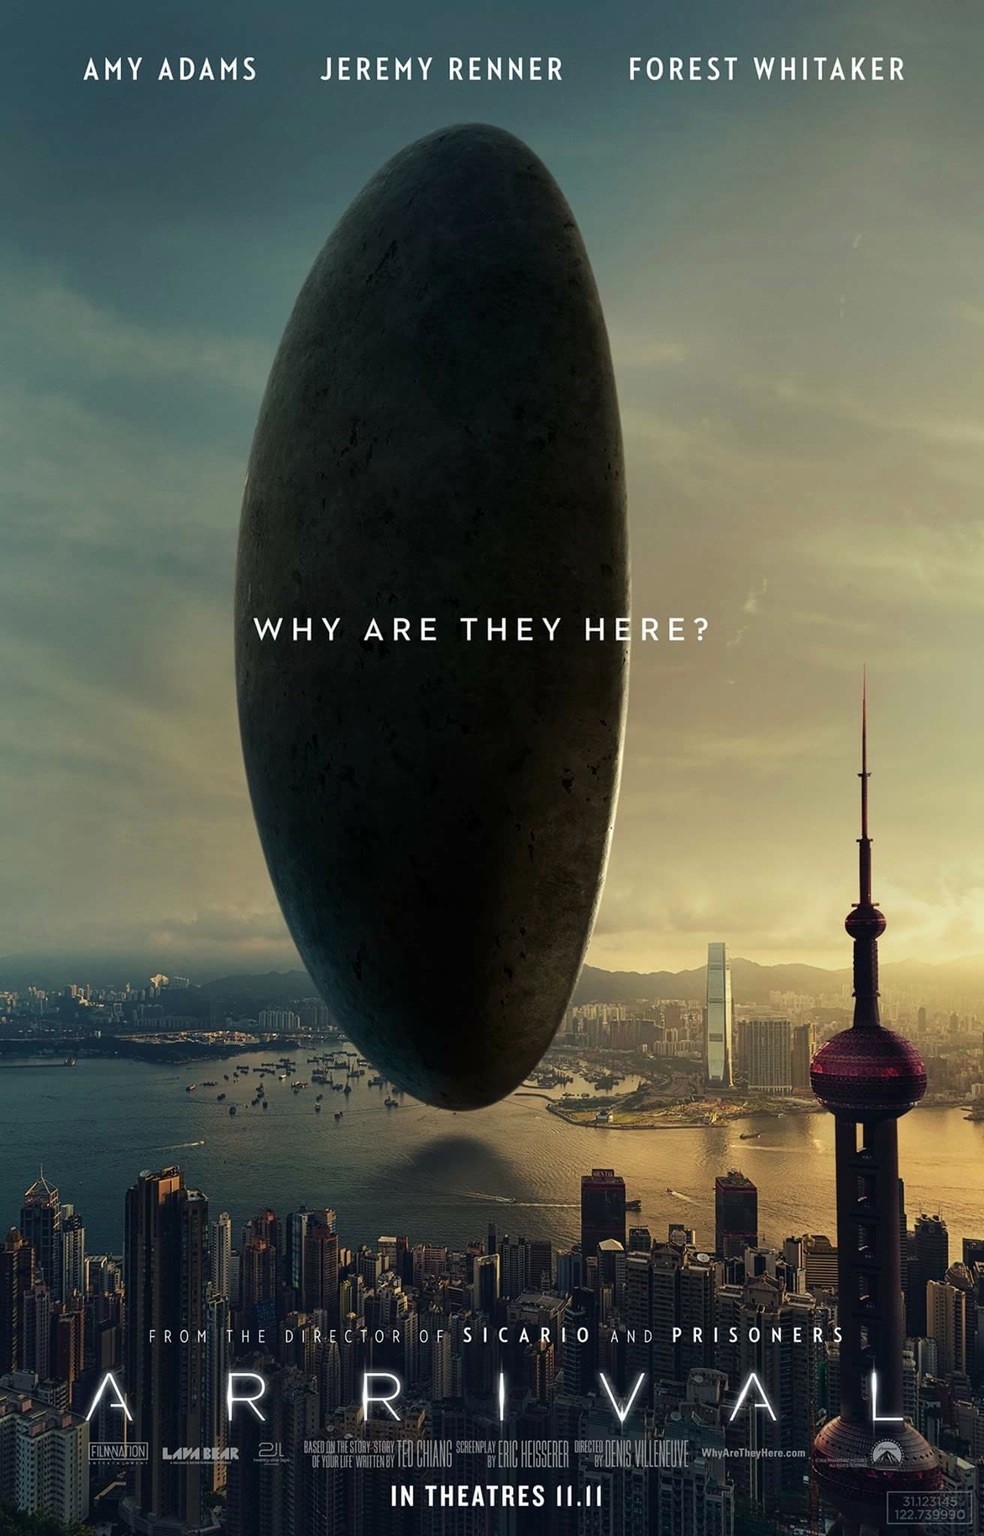 Awkward! Pearl Tower Appears in Movie Poster Version of Hong Kong